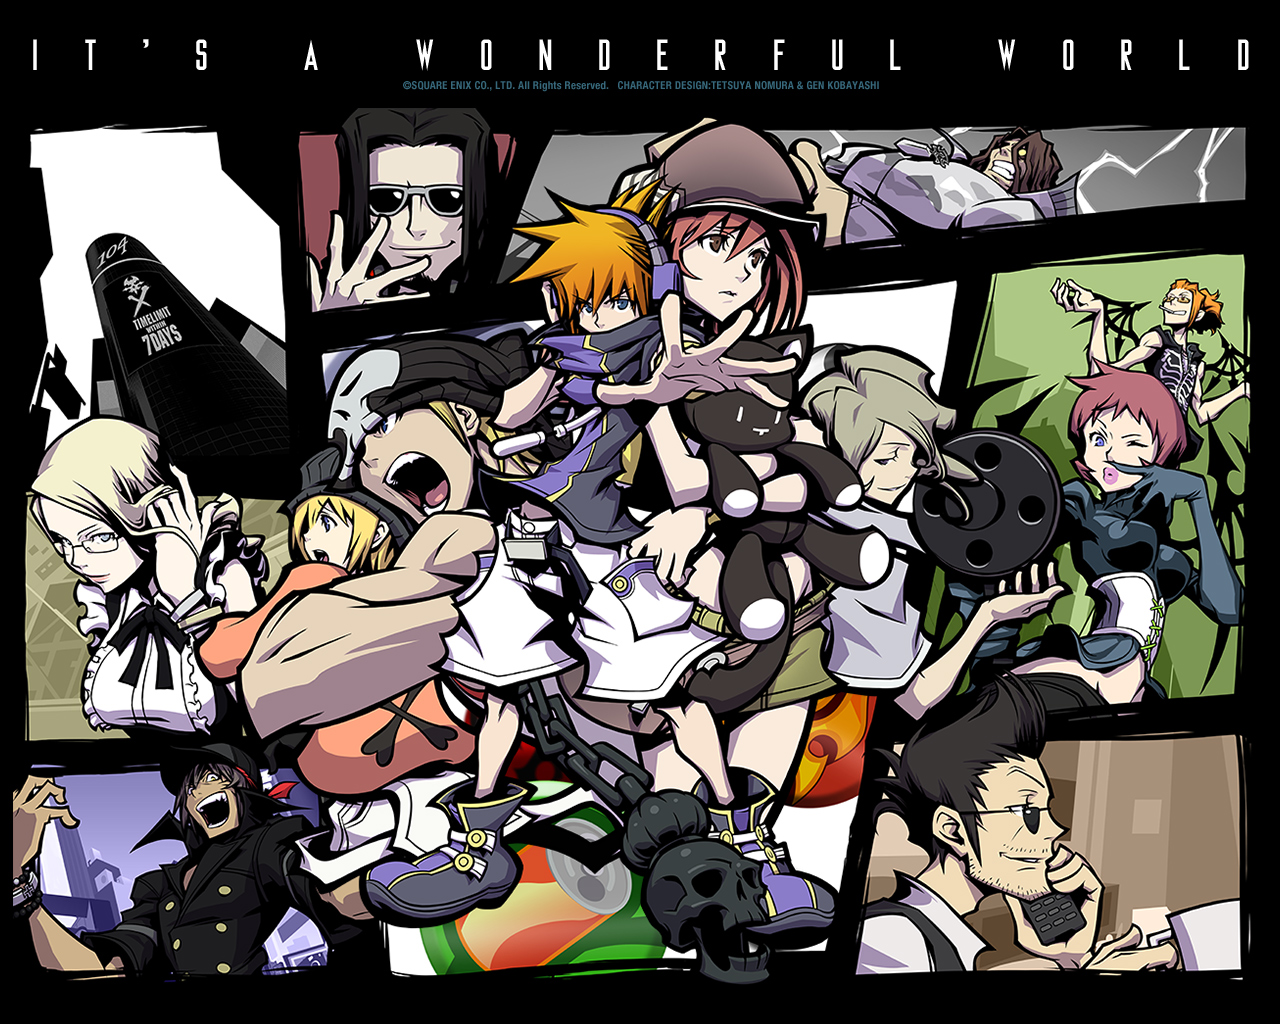 The World Ends With You #8